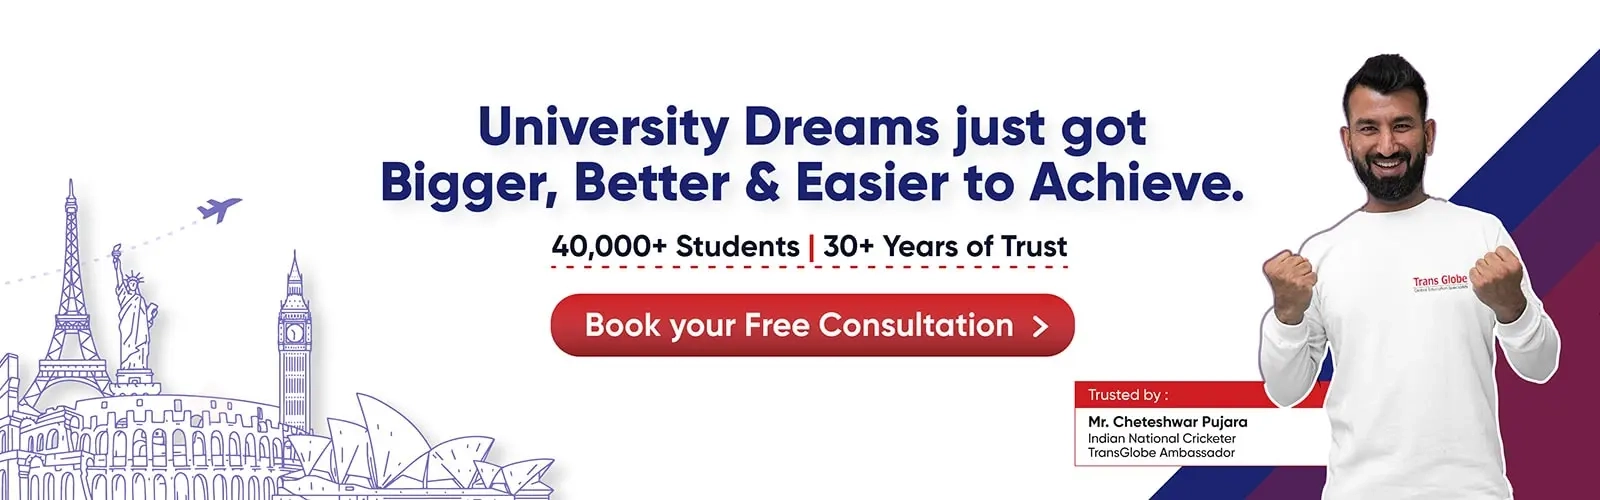 University Dreams just got bigger, better and easier to achieve